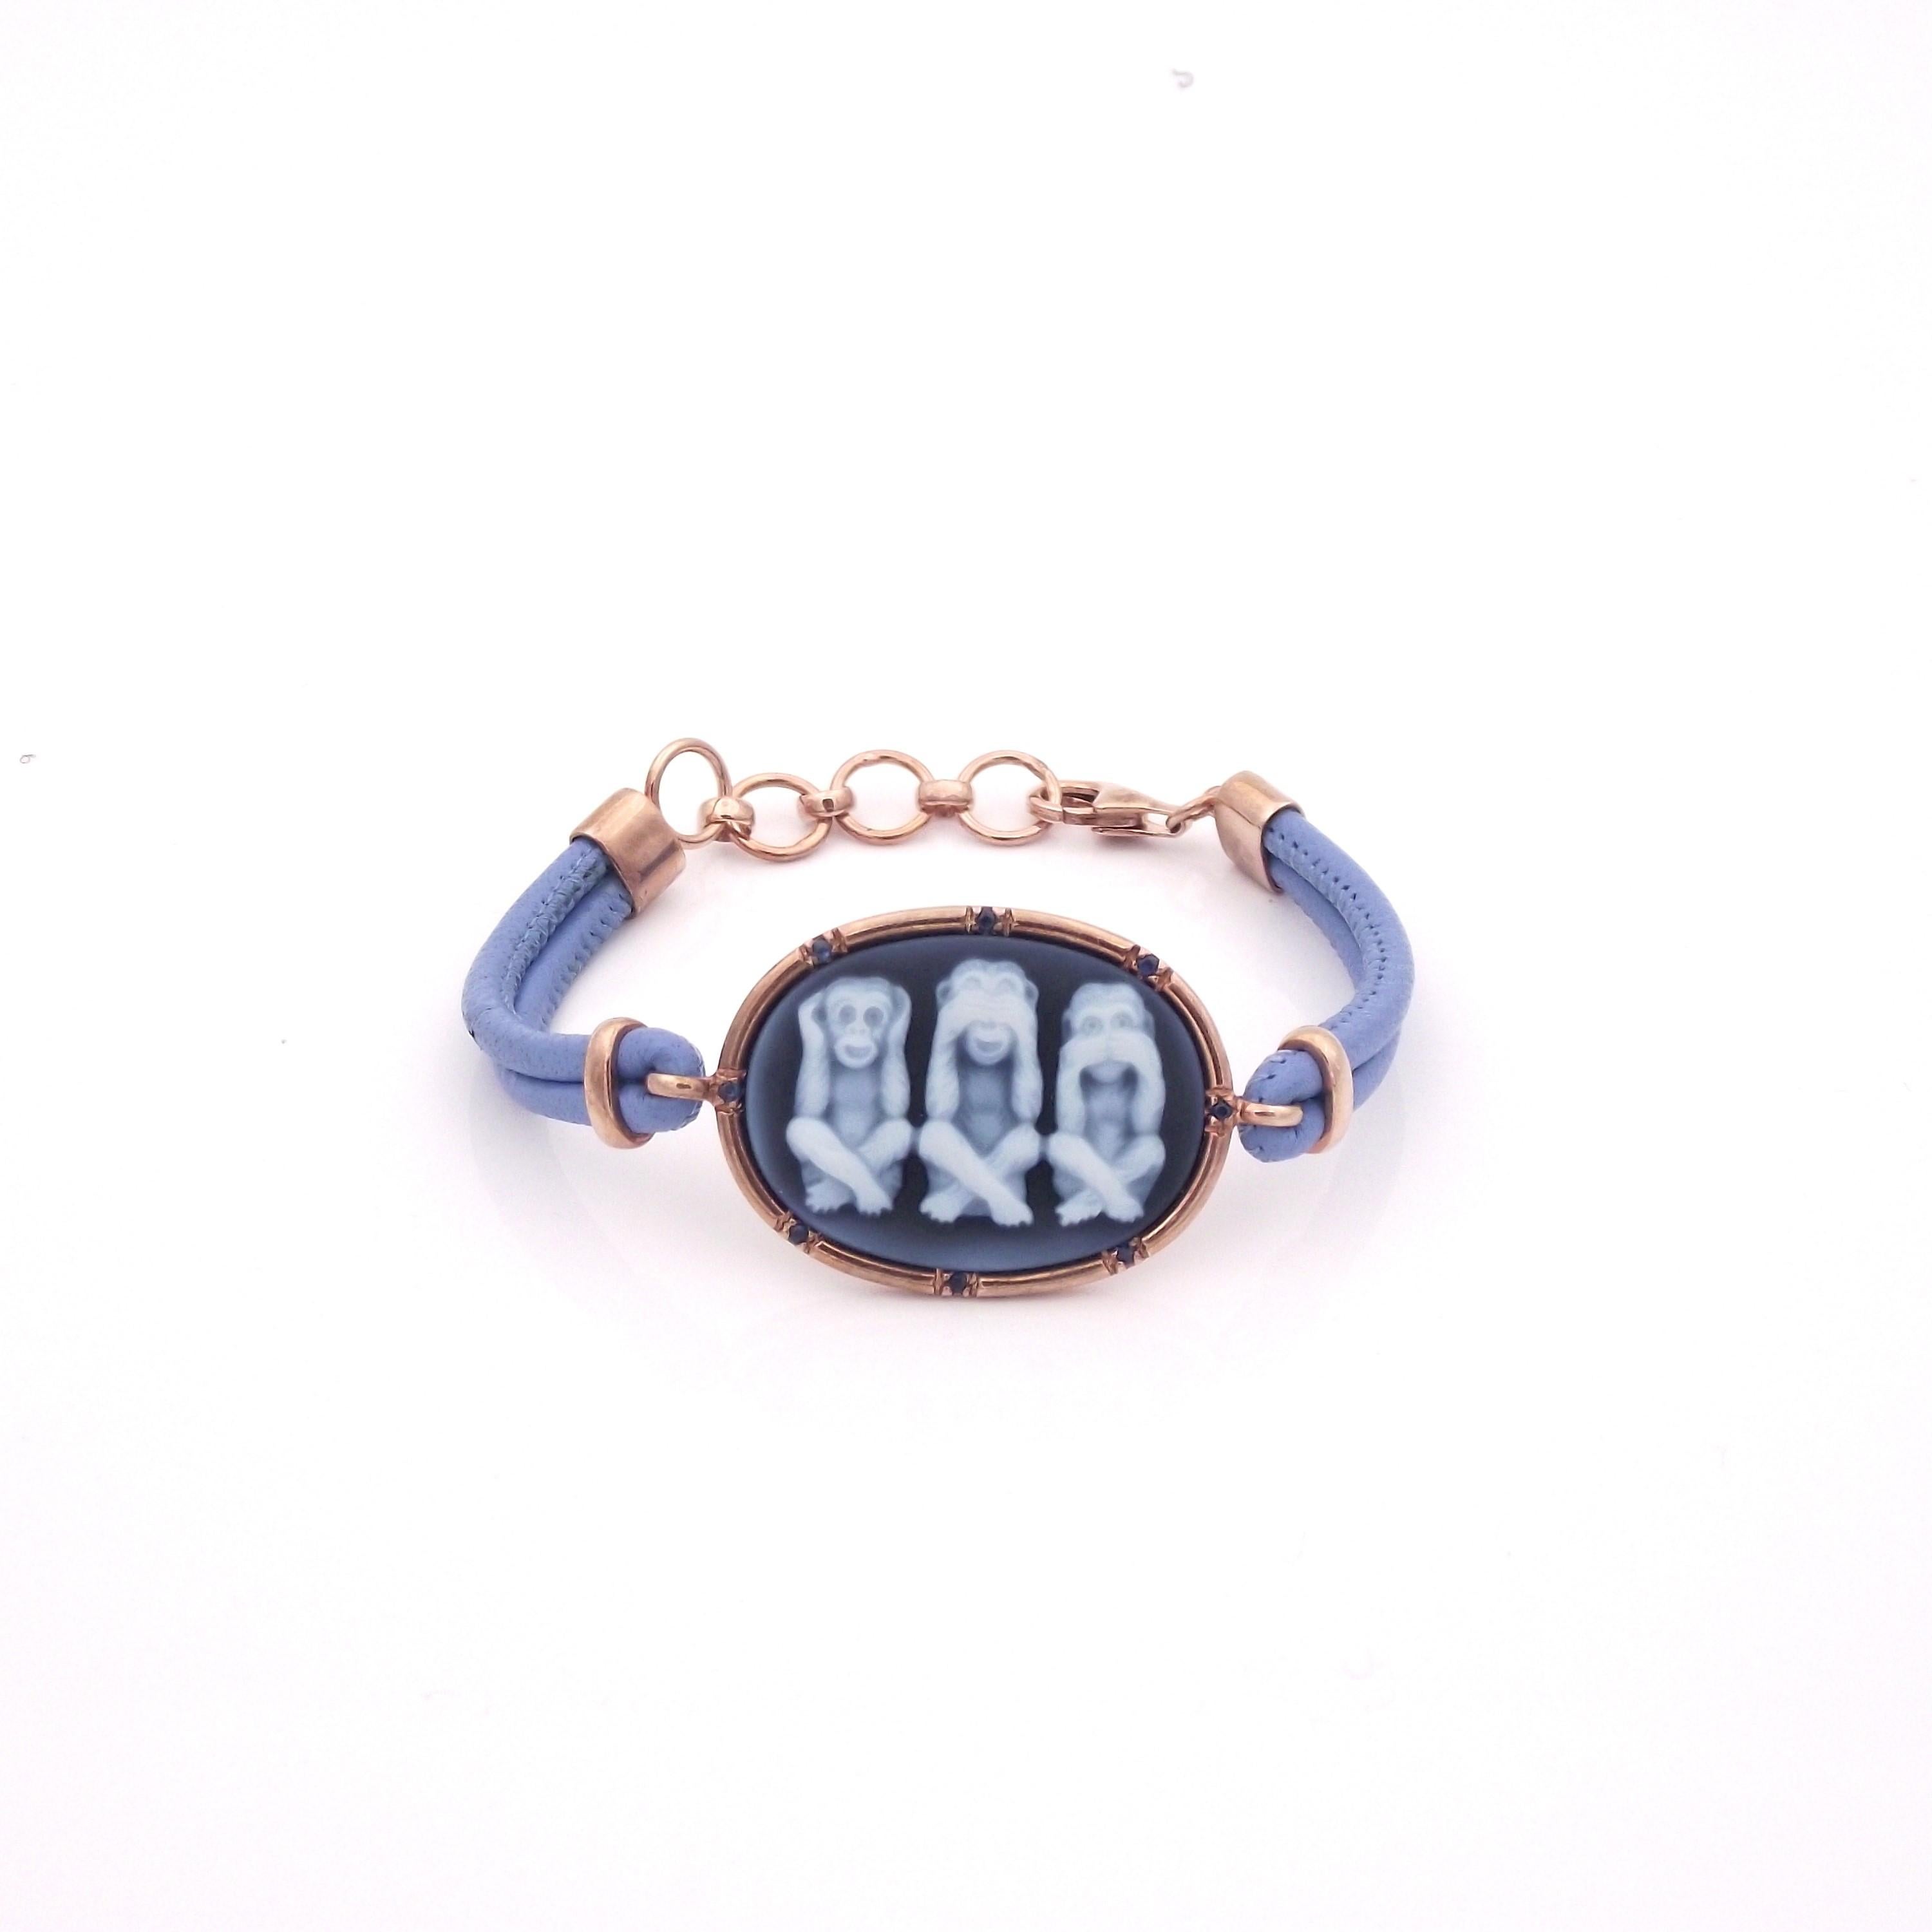 30mm blue agate cameo hand-carved, sterling silver rose rhodium plated with 0.15ct blue sapphires and leather.
This items comes in other colors such as turquoise, pink, violent and green.